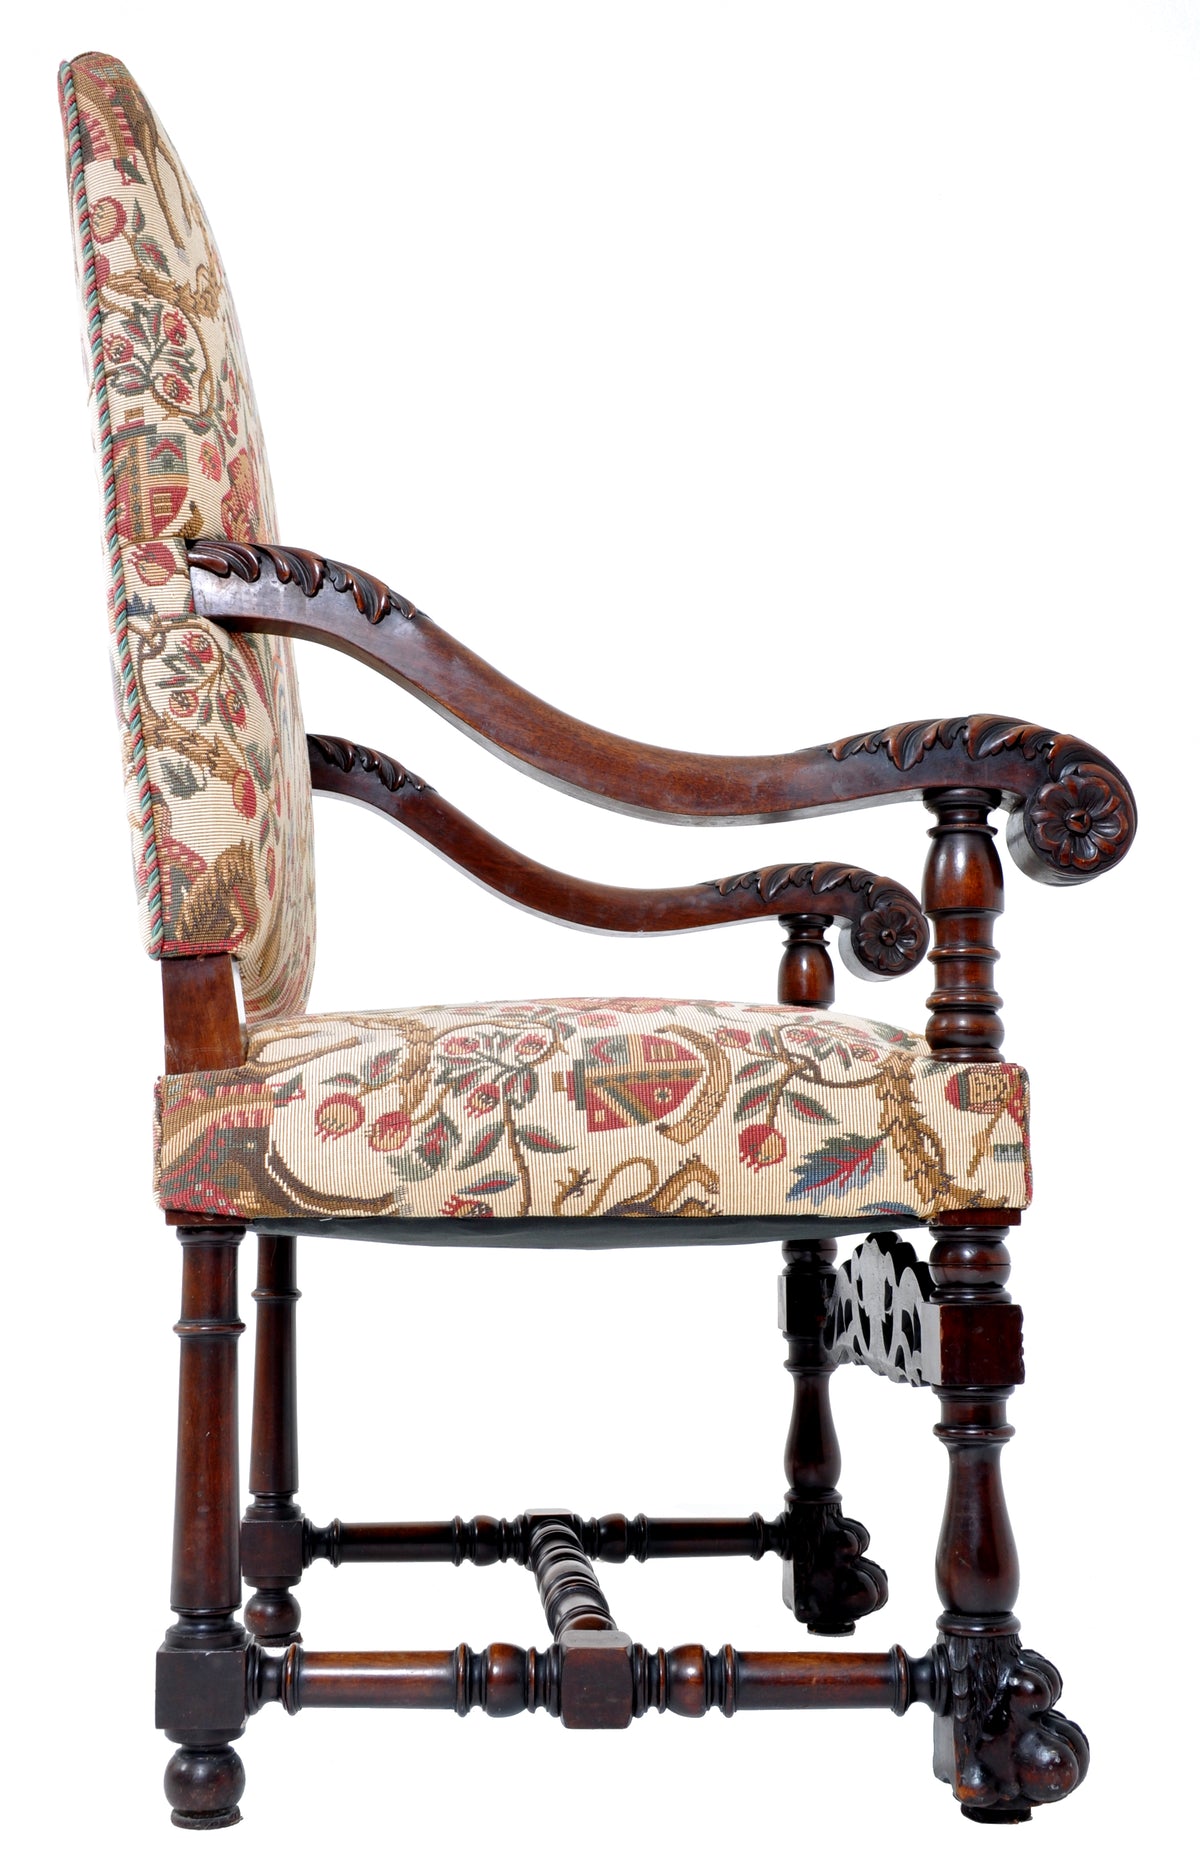 Pair of Antique Baroque Carved Mahogany Throne Chairs, circa 1870